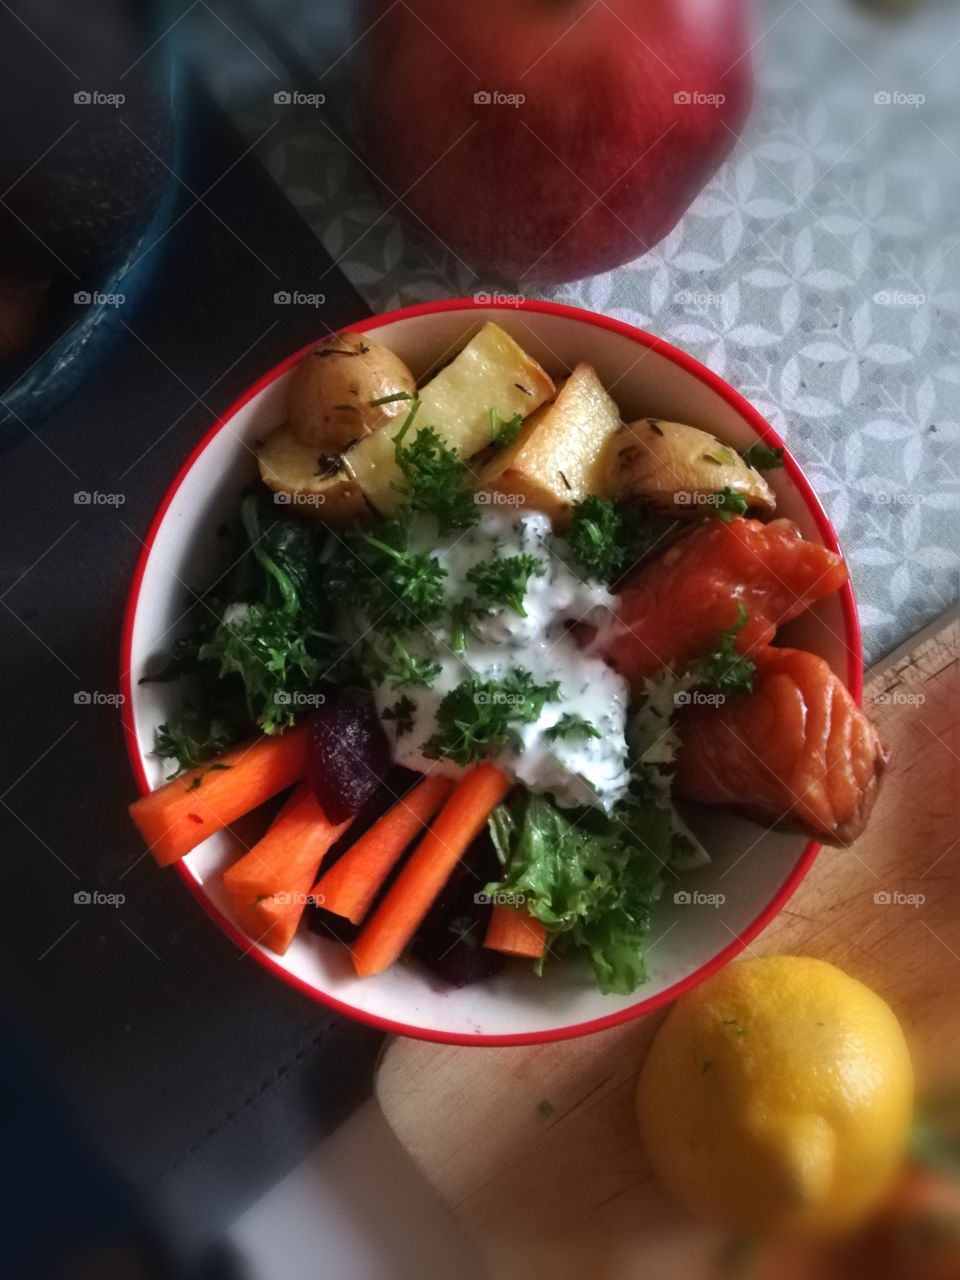 Bowl with smoked salmon, cream cheese, carrots and potatoes